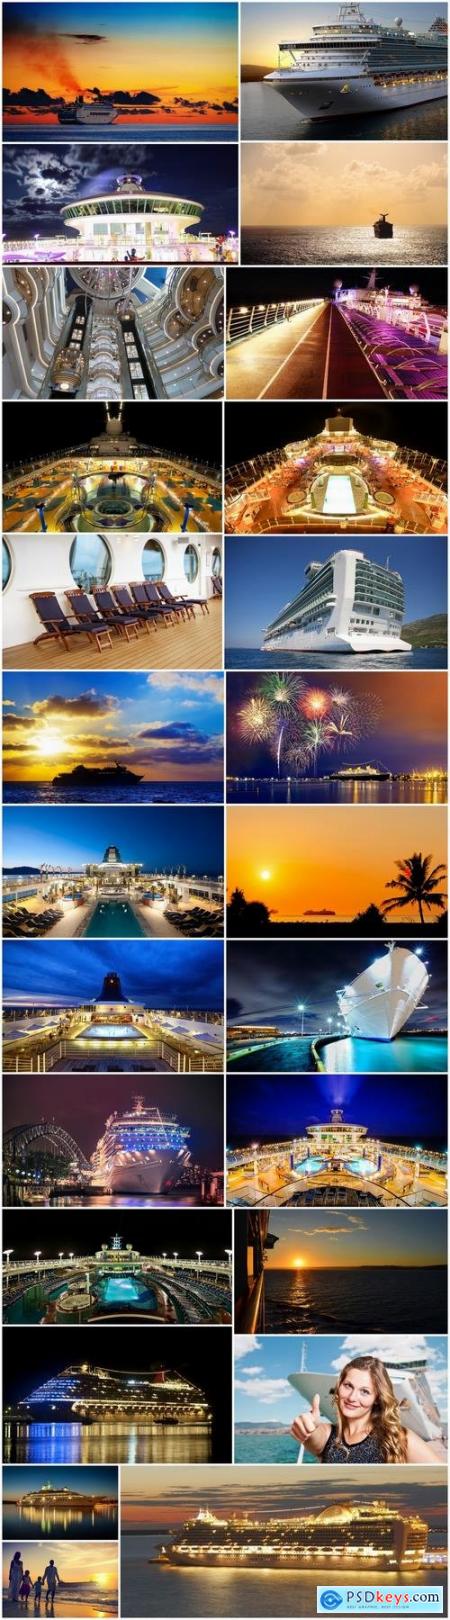 Cruise liner vacation cruise vacation journey by sea deck 25 HQ Jpeg